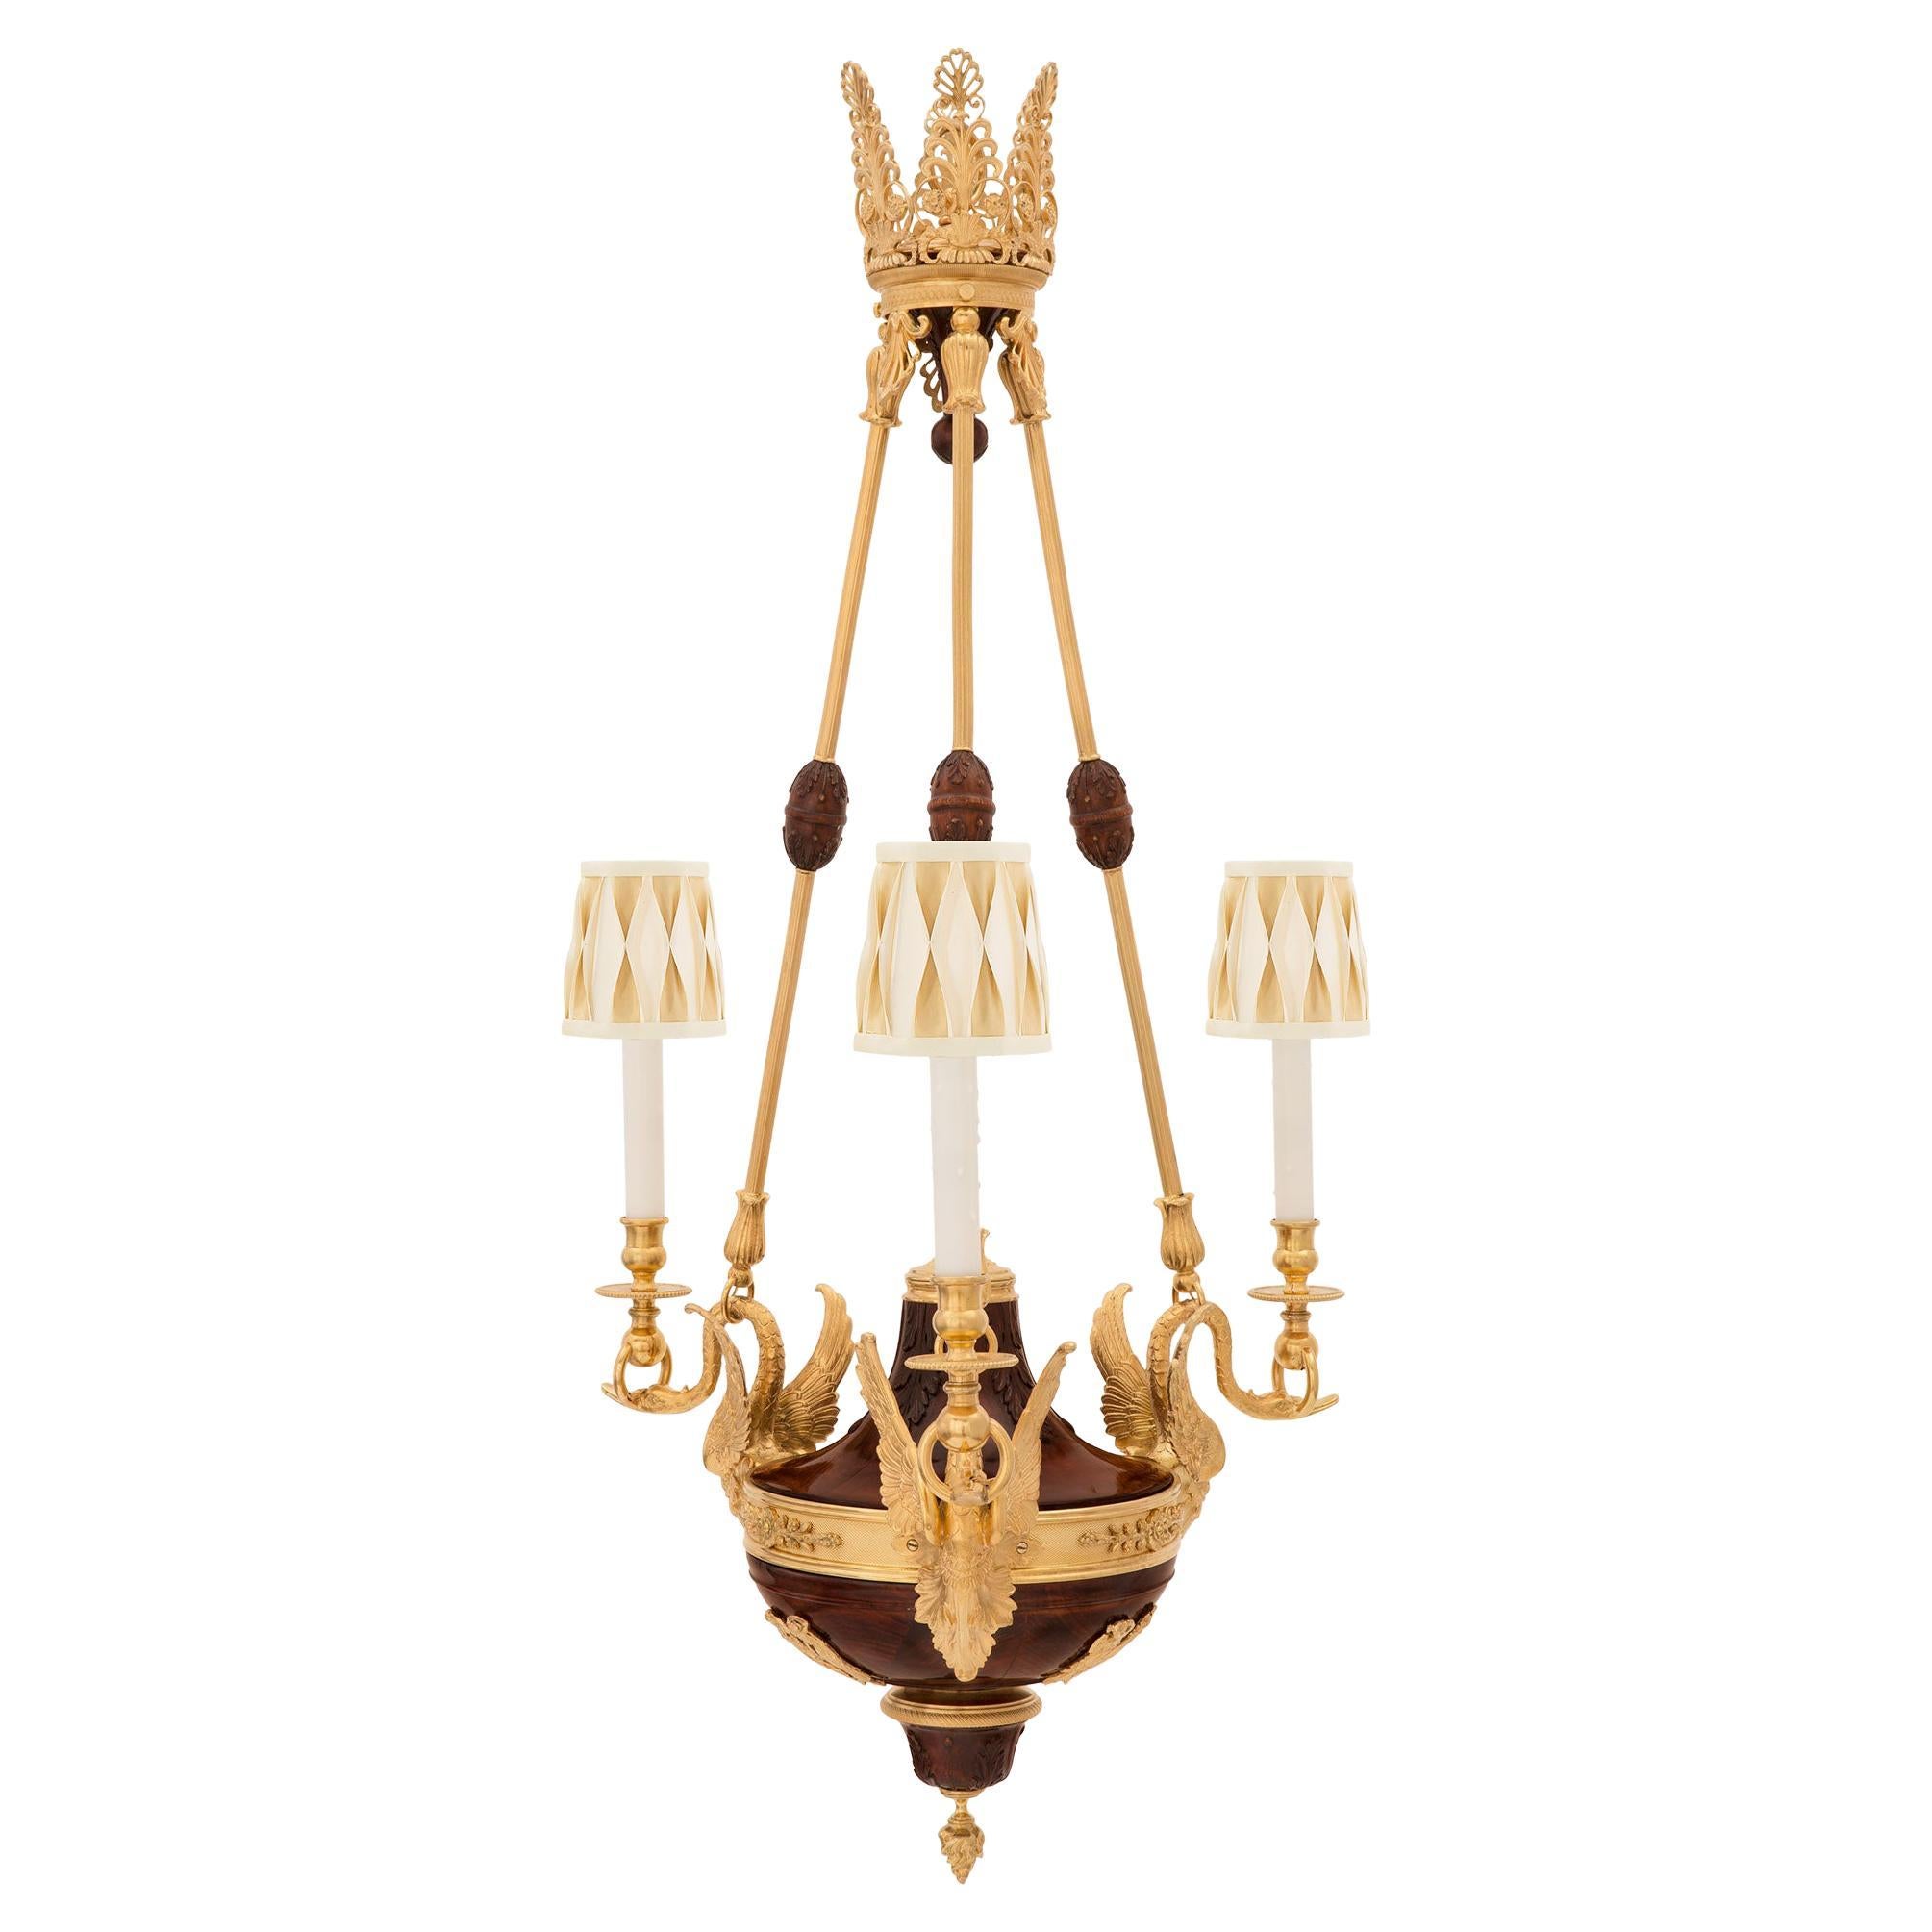 French 19th Century Neoclassical Style Maple and Ormolu Chandelier